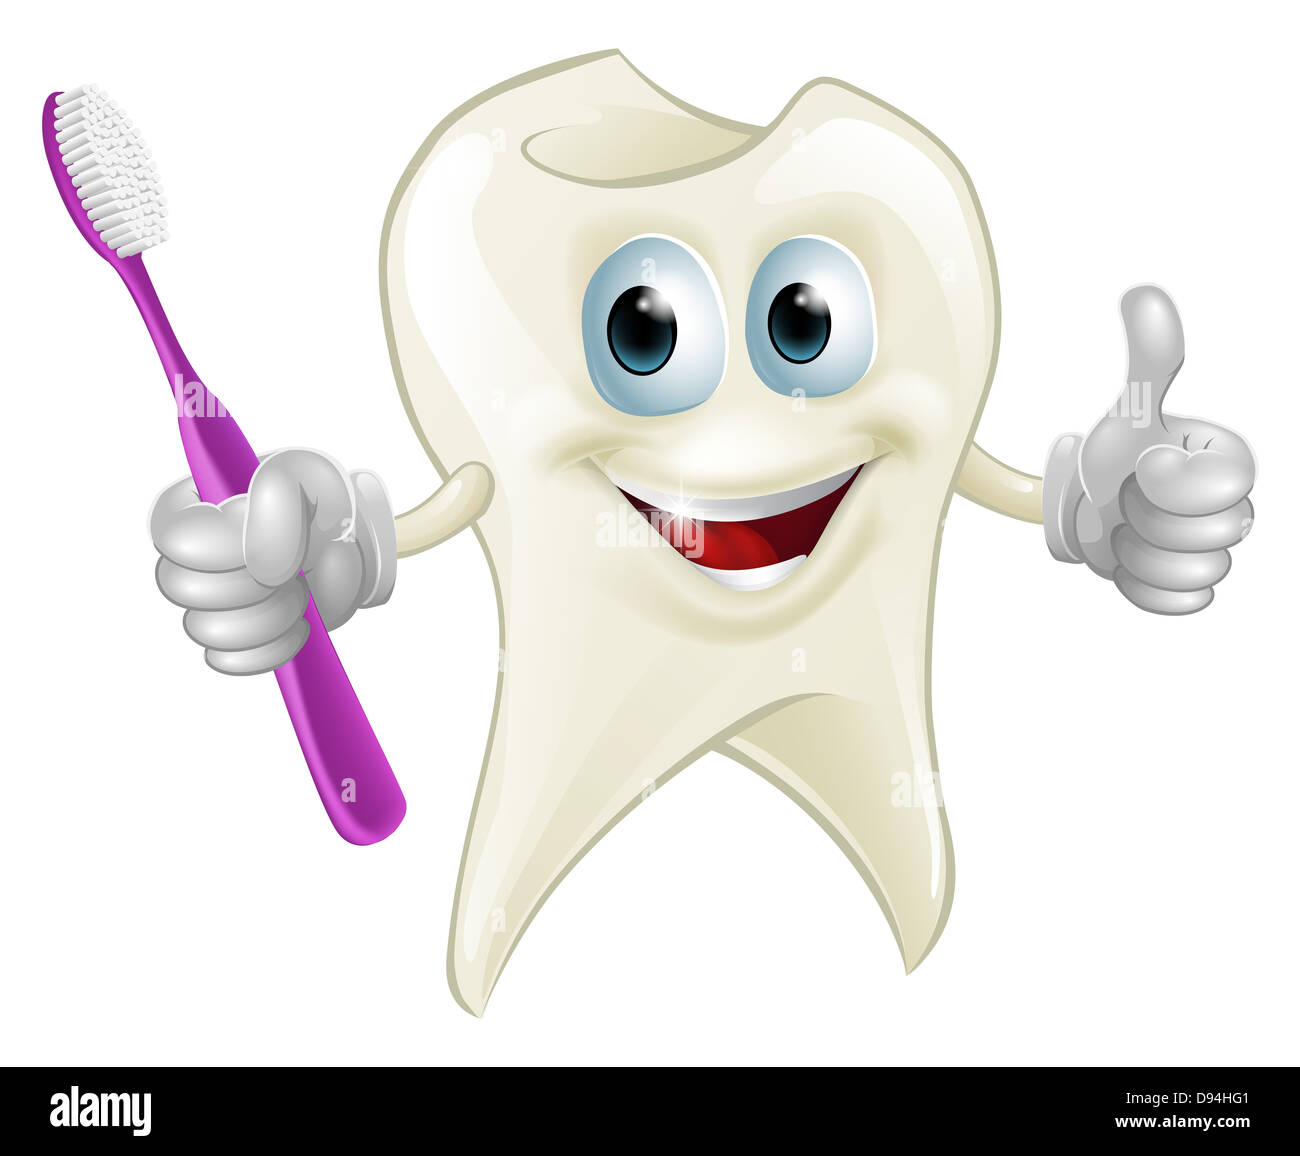 An illustration of a cartoon tooth man character mascot holding a toothbrush Stock Photo